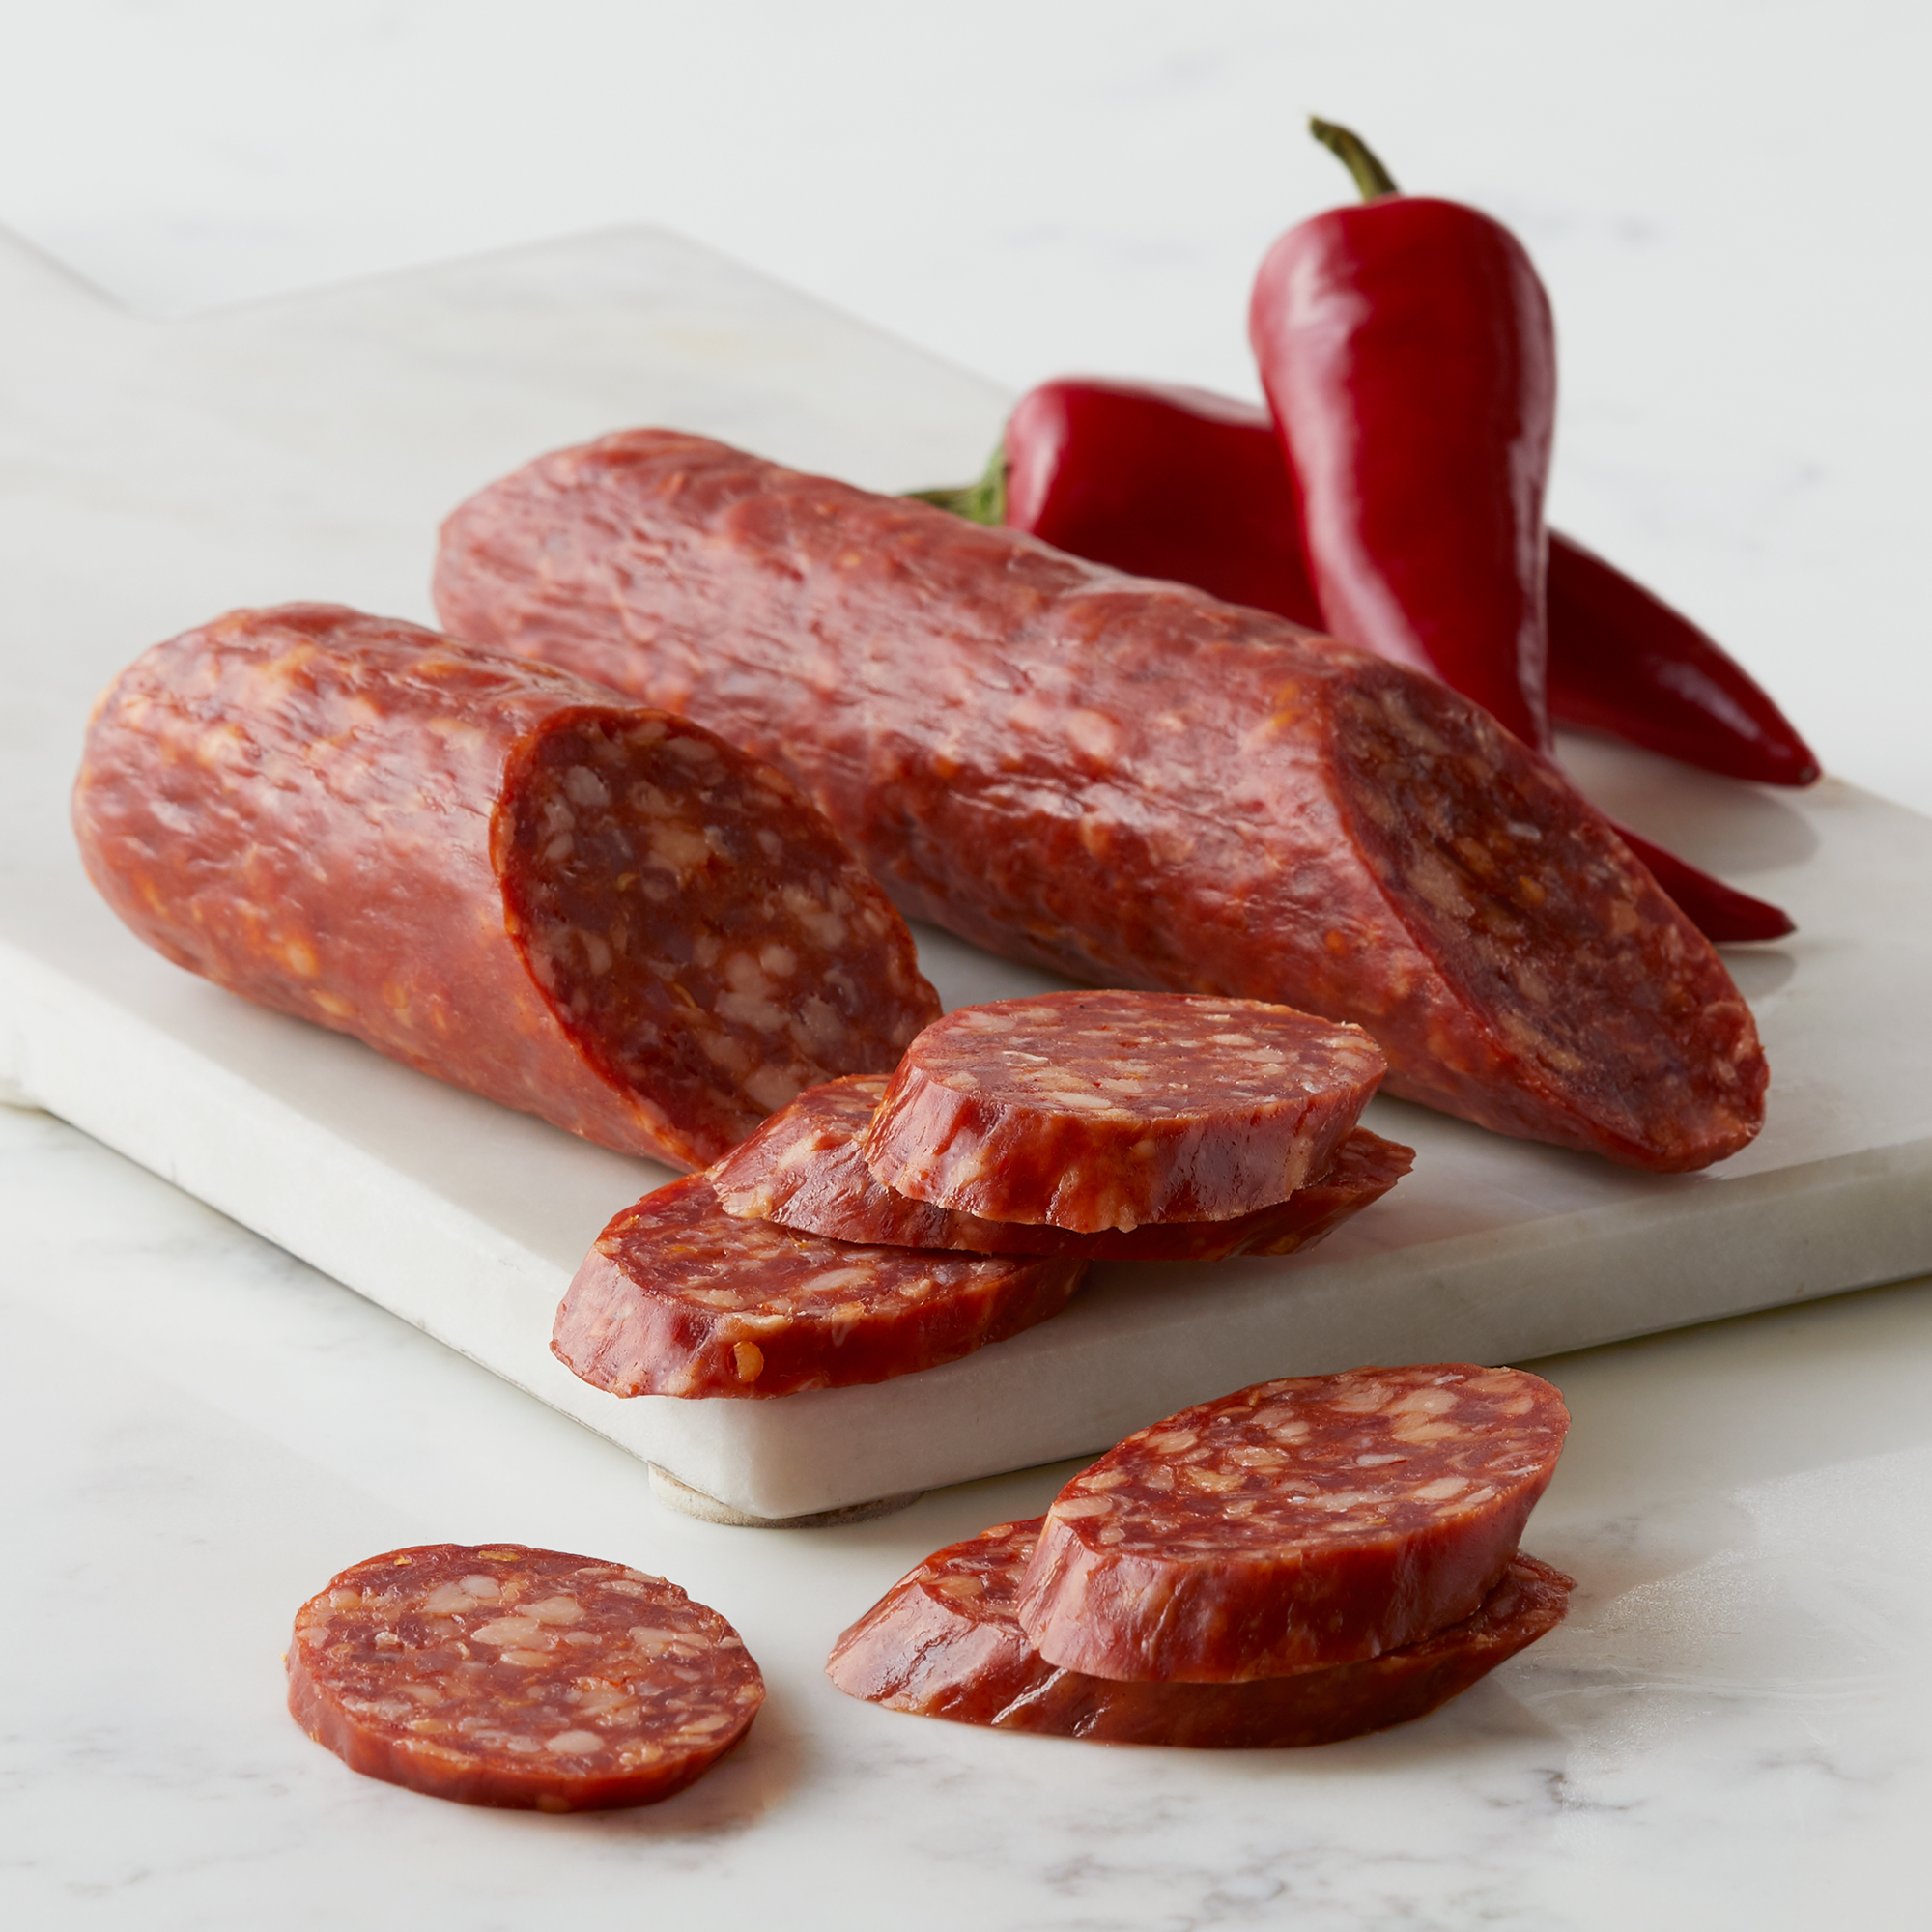 https://www.hickoryfarms.com/on/demandware.static/-/Sites-Web-Master-Catalog/default/dw18b50a15/images/products/hickory-farms-reserve-three-pepper-dry-salami-032024-1.jpg